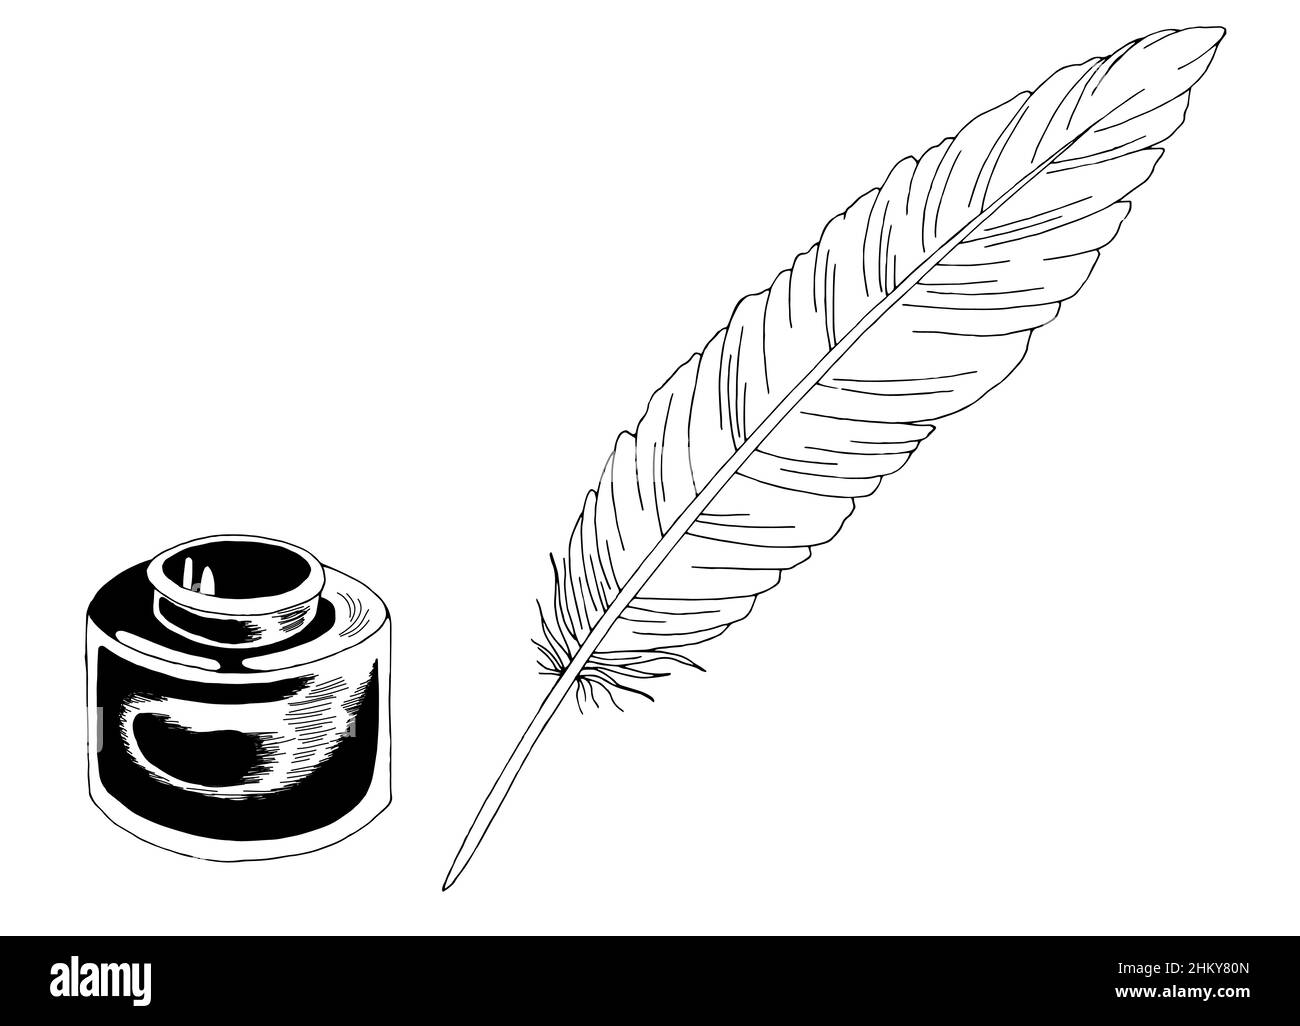 Pen feather and inkwell graphic black white isolated sketch illustration vector Stock Vector